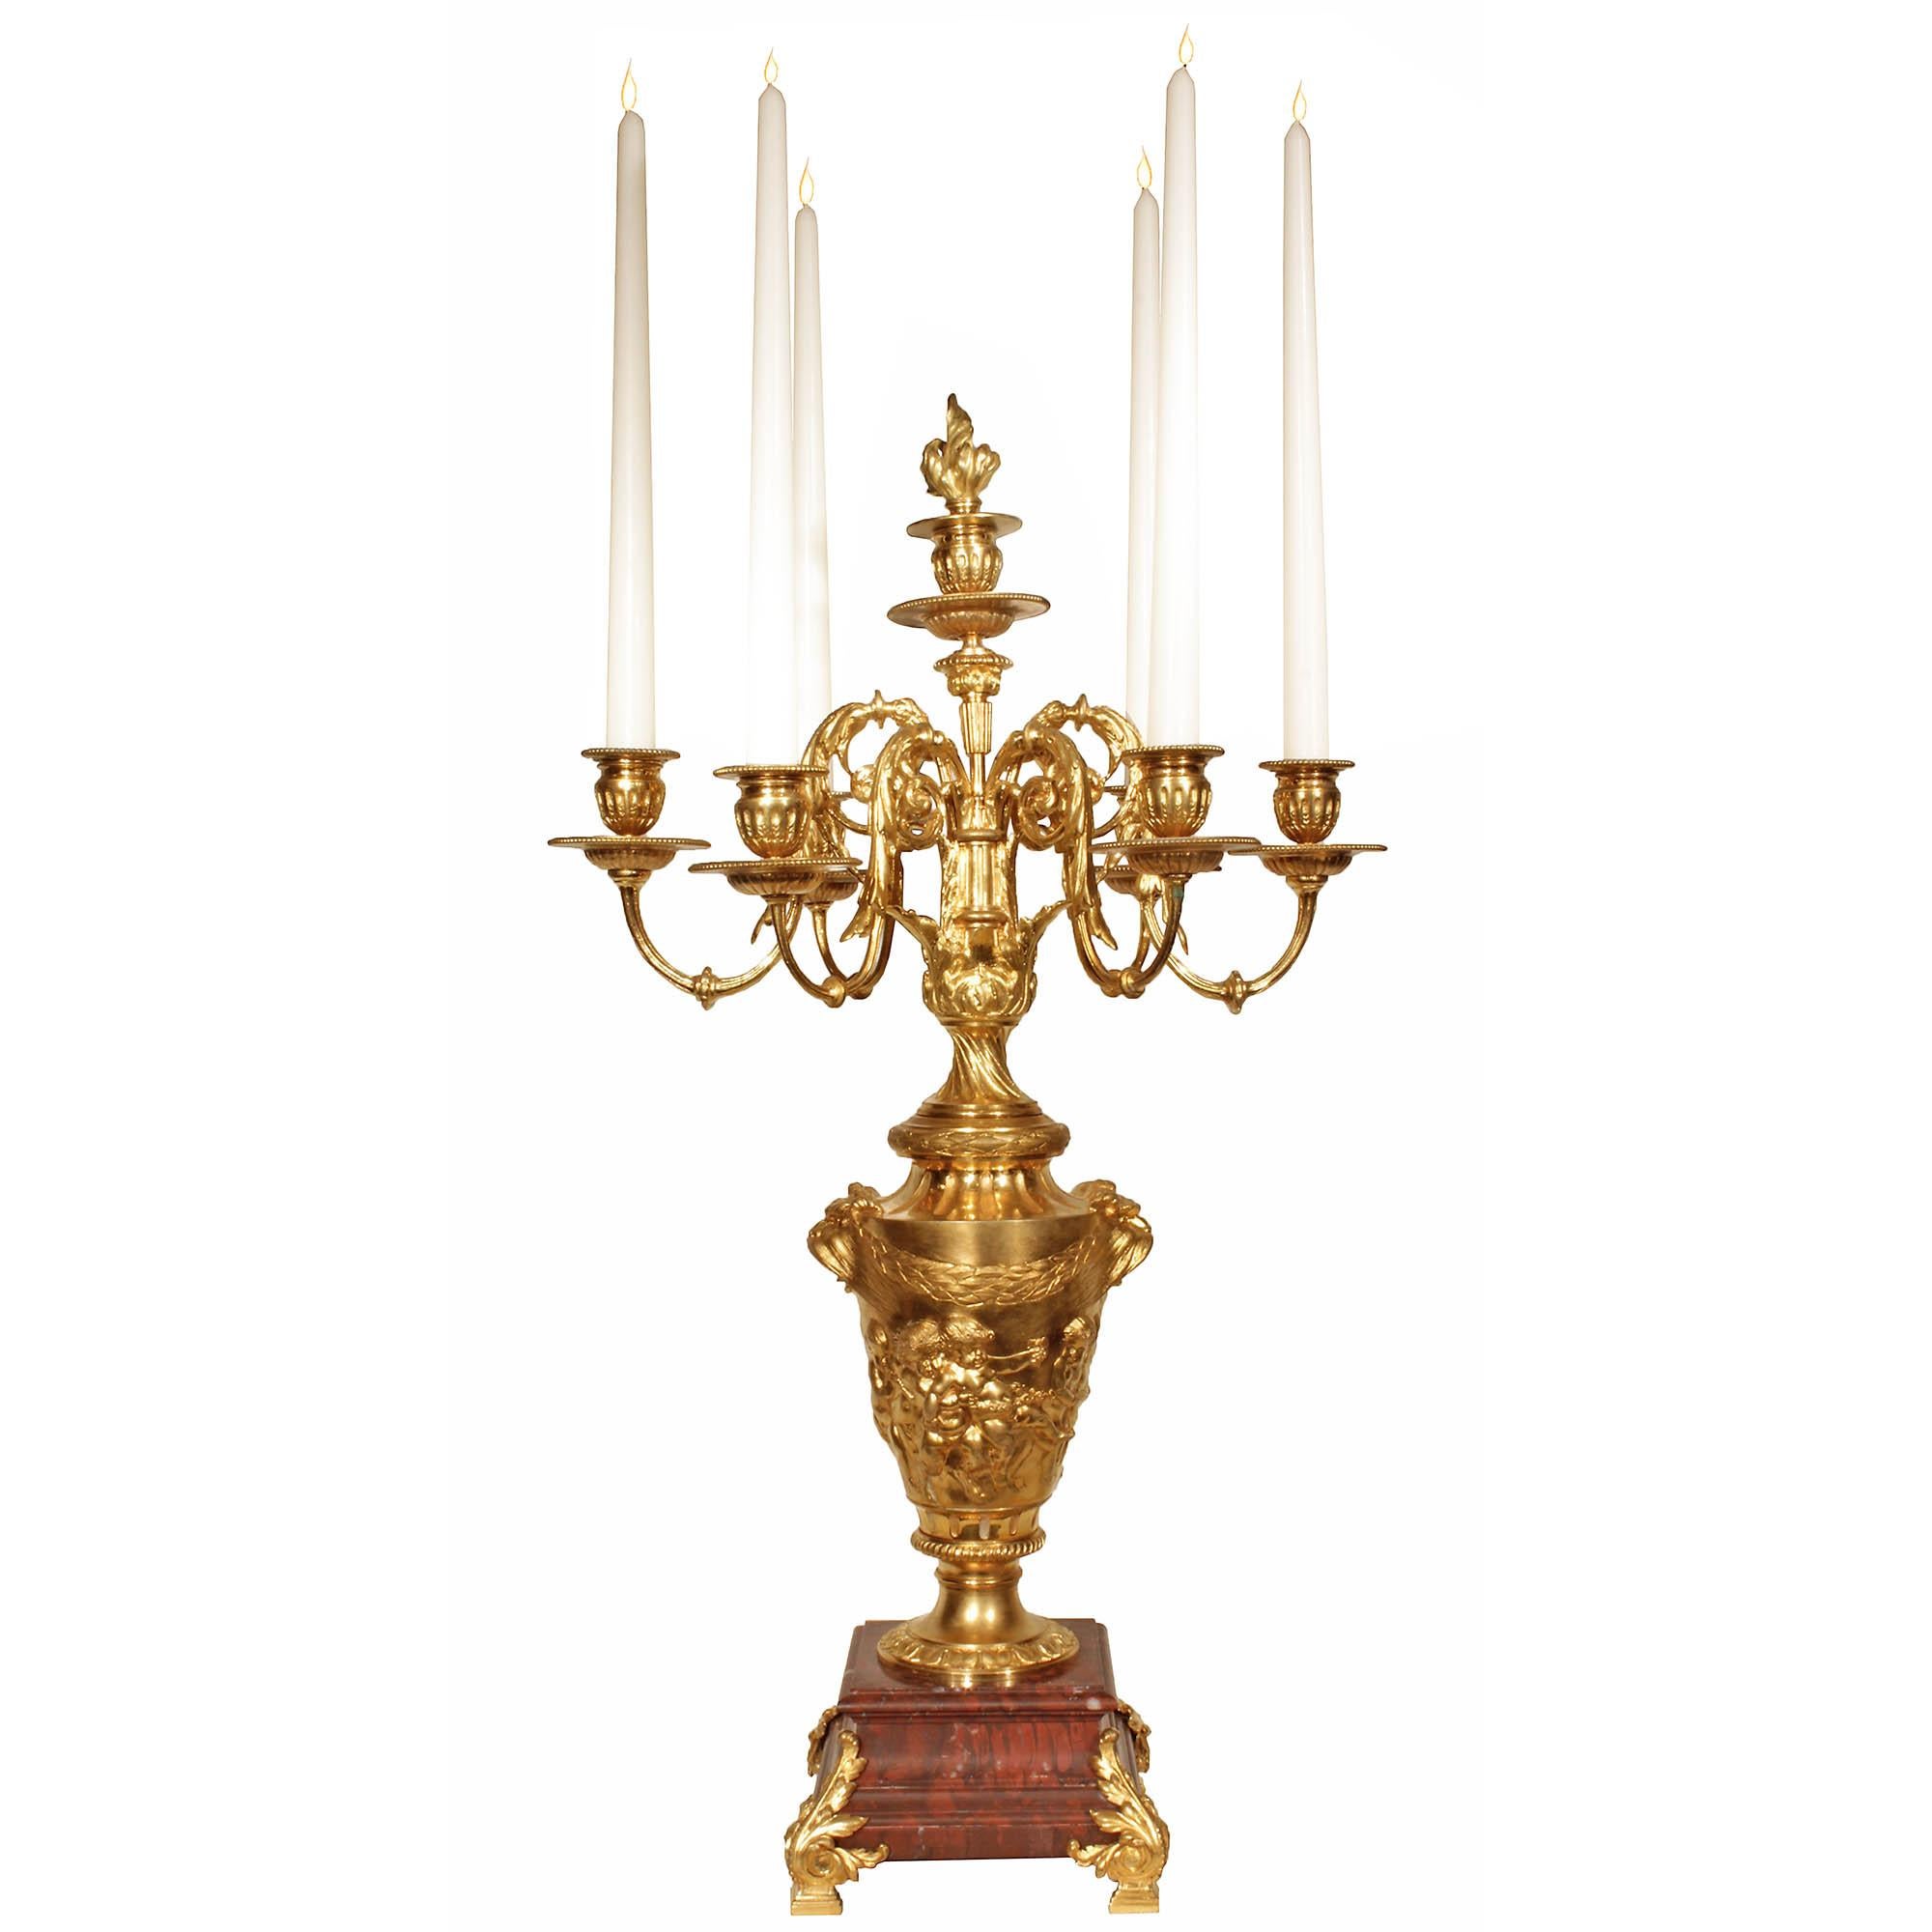 An exquisite pair of 19th century Louis XVI style ormolu and marble candelabras. Each candelabra is raised on a square Rouge Griotte marble base on ormolu feet with acanthus leaf ormolu mounts. Above, each superbly chased ormolu urn portrays a